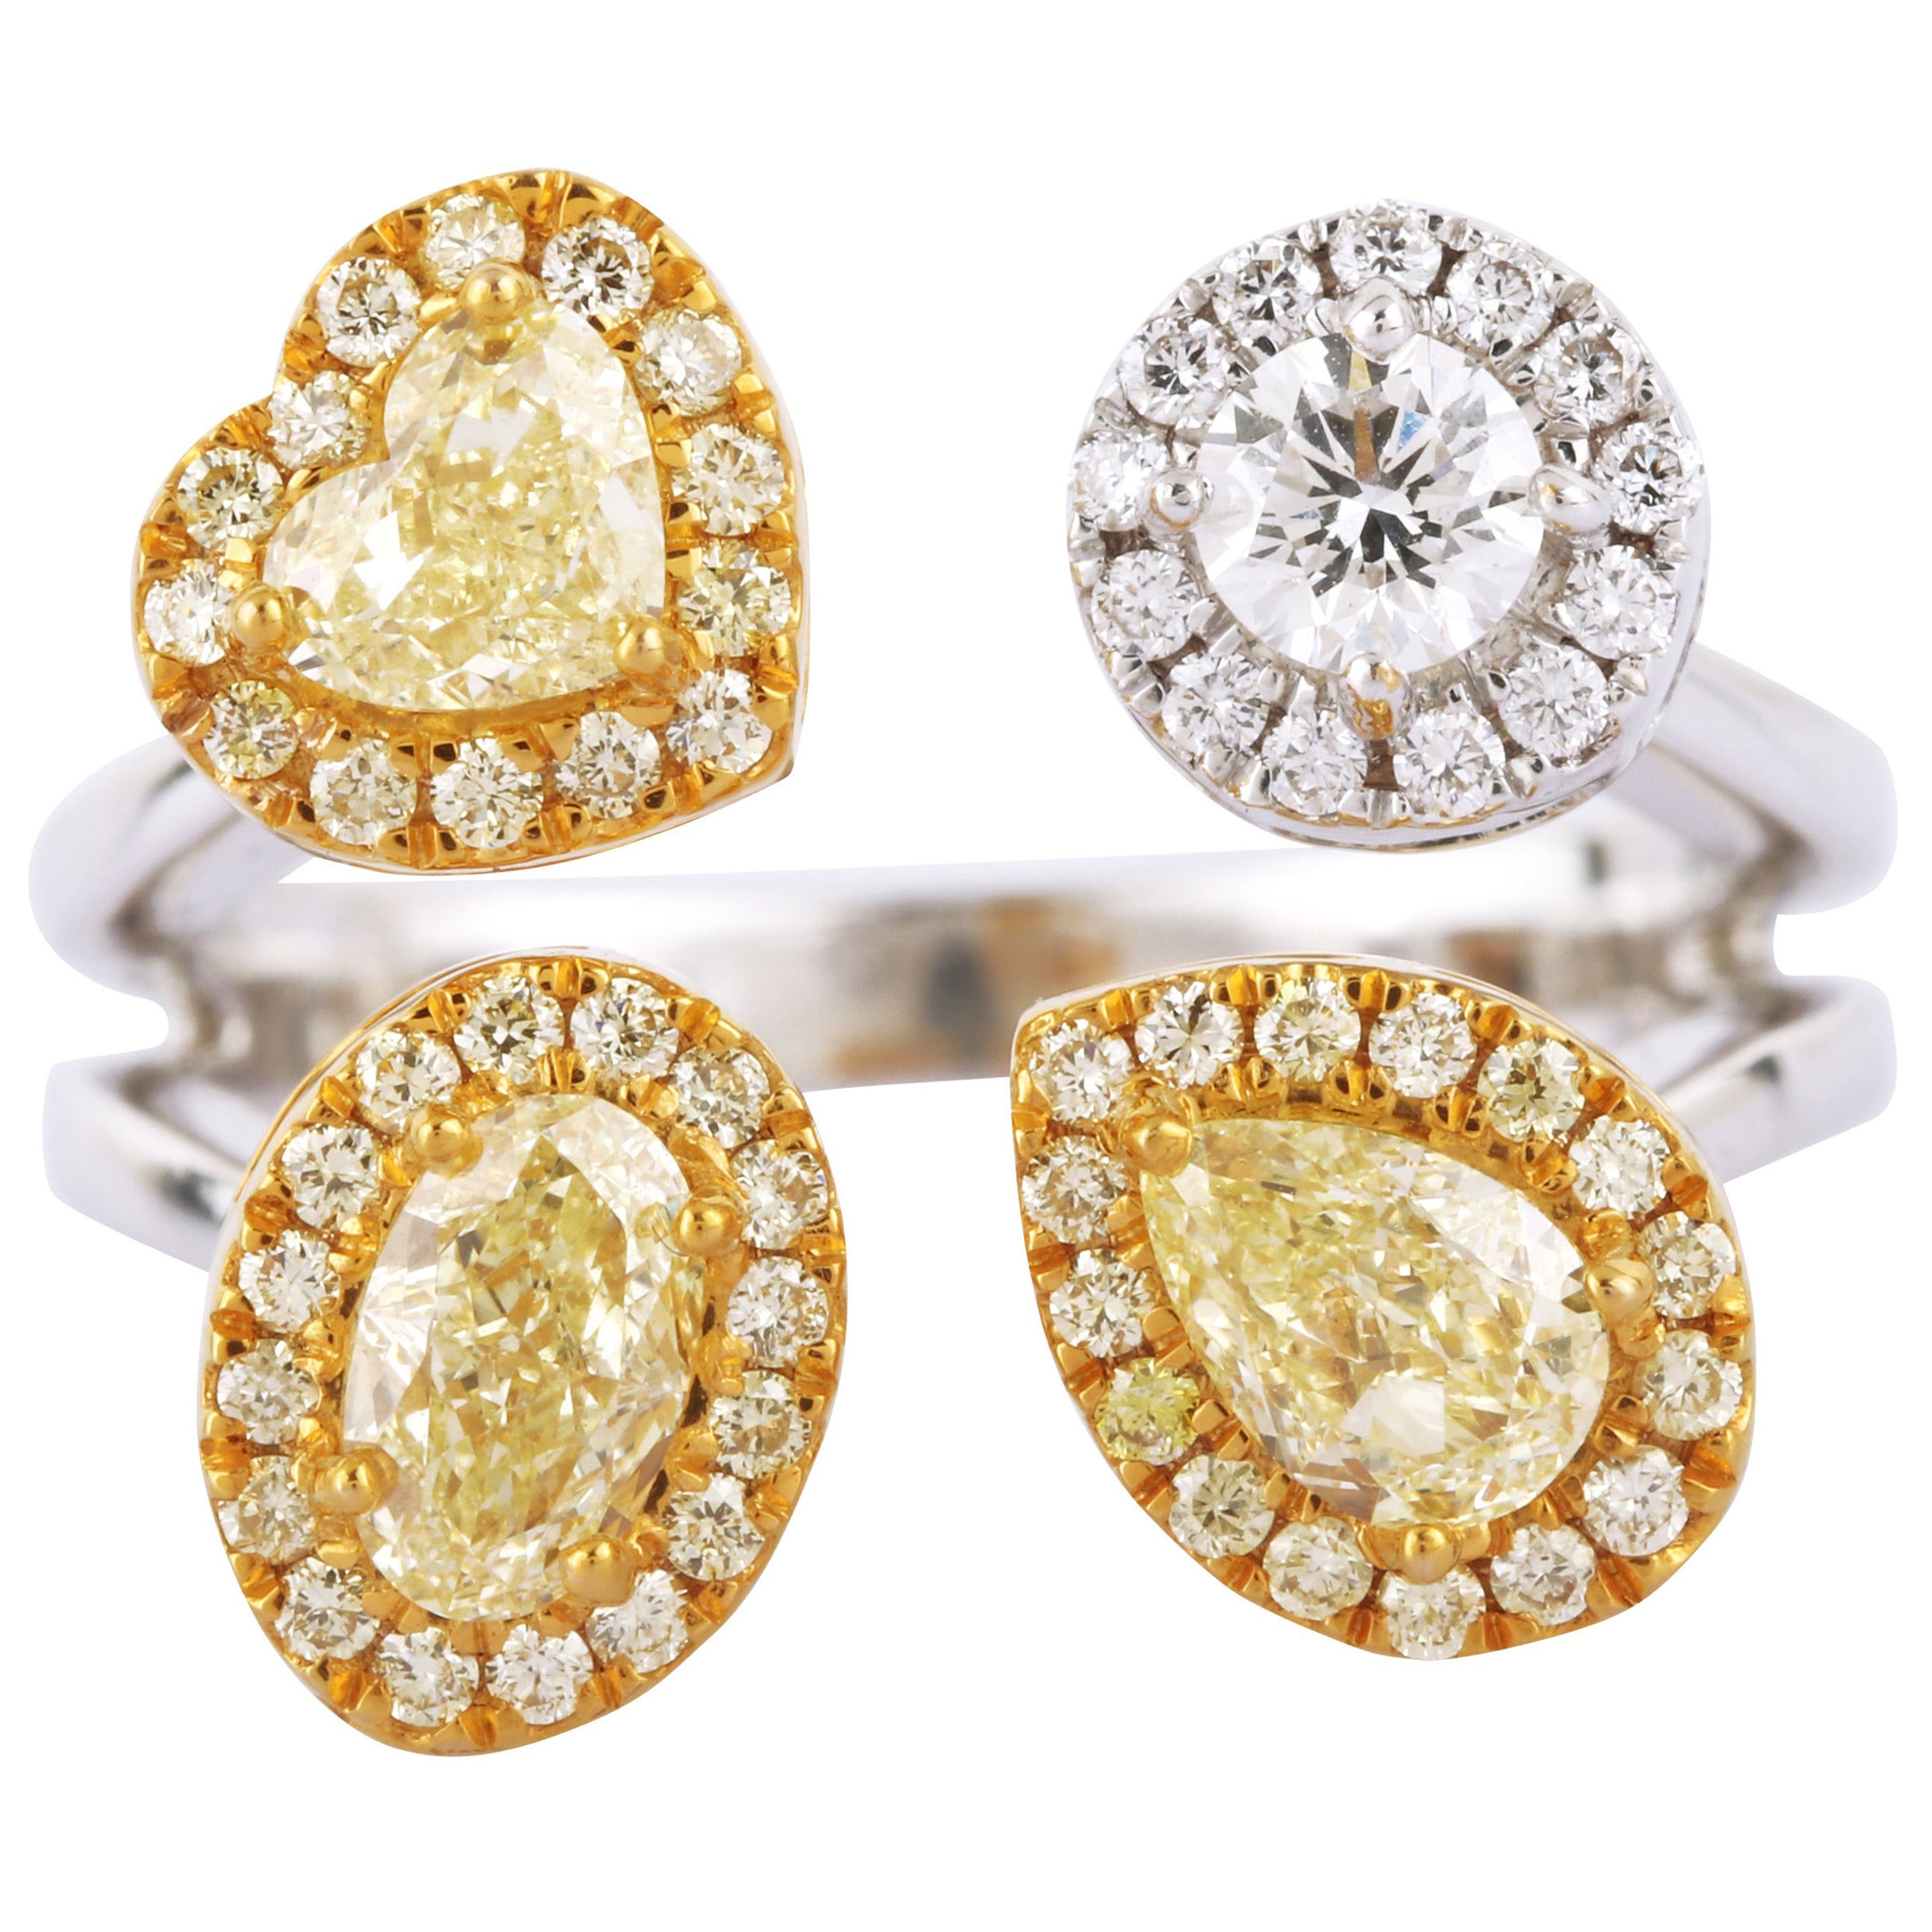 18 Karat Gold 1.73 Carat White and Fancy Yellow Diamond Cocktail Ring For Sale